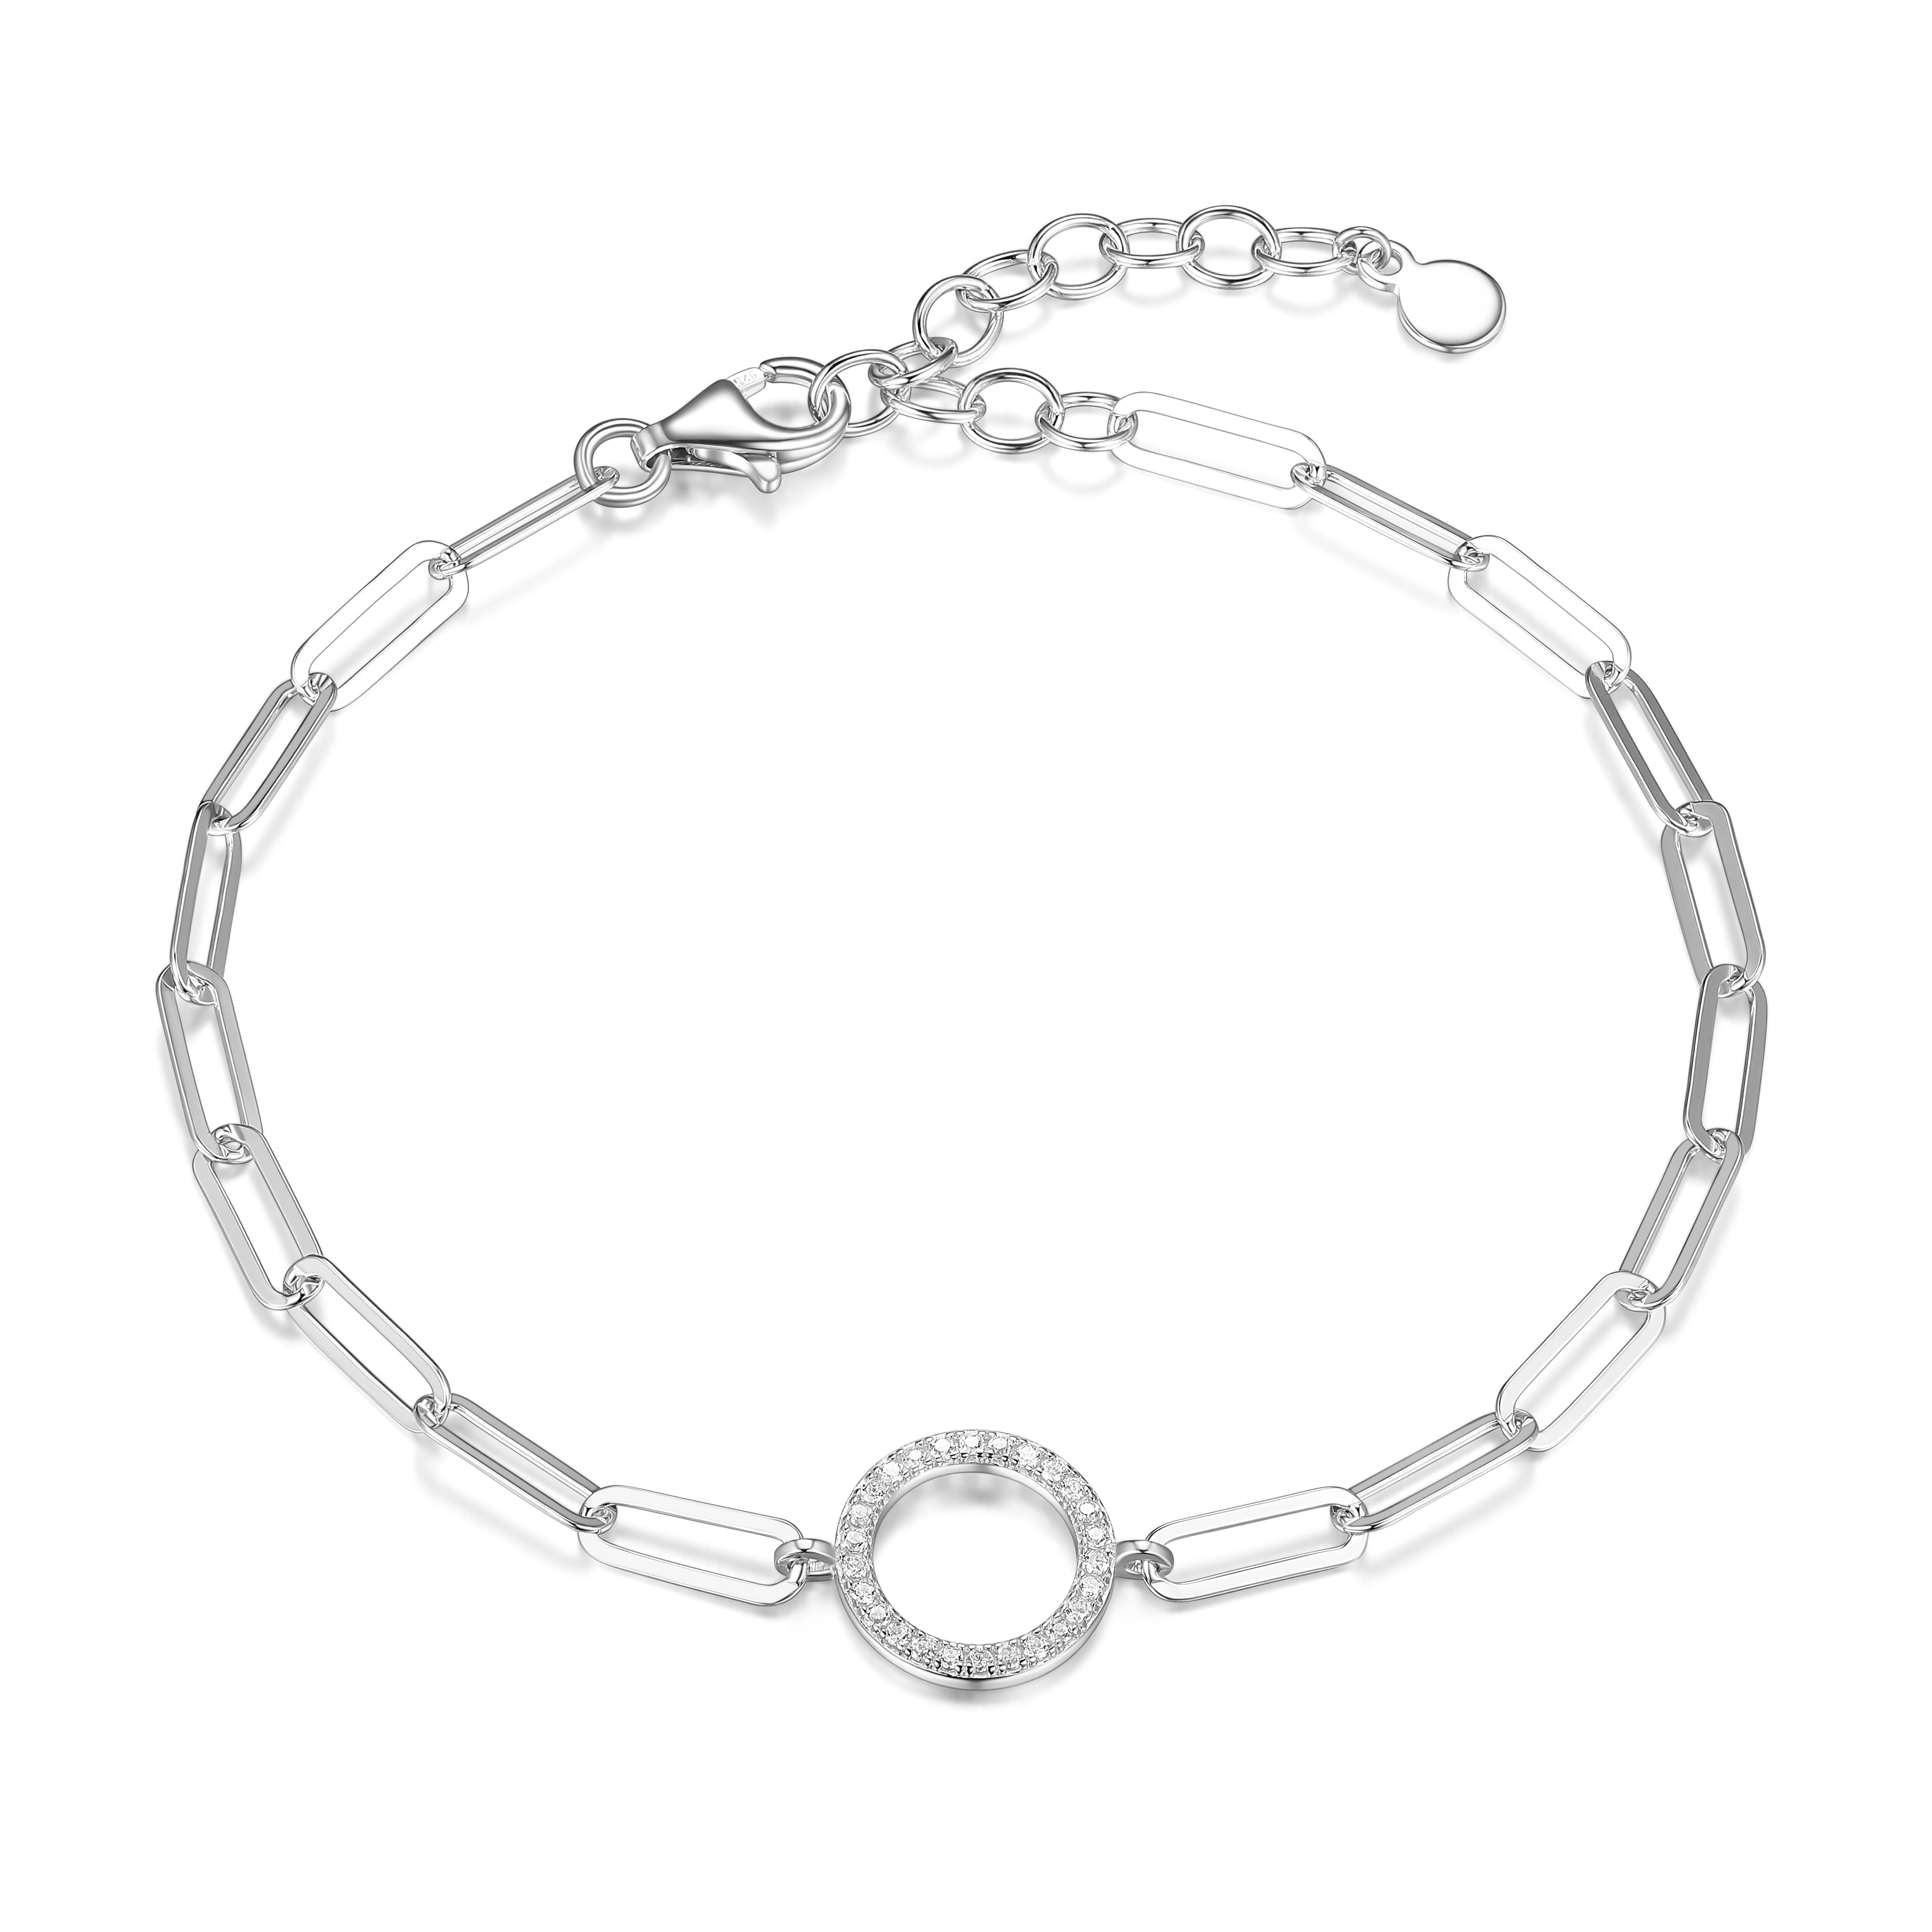 Women's Fashion Jewelry Gold Or Silver Double Layer Heart Anklet Bracelet 75-1 